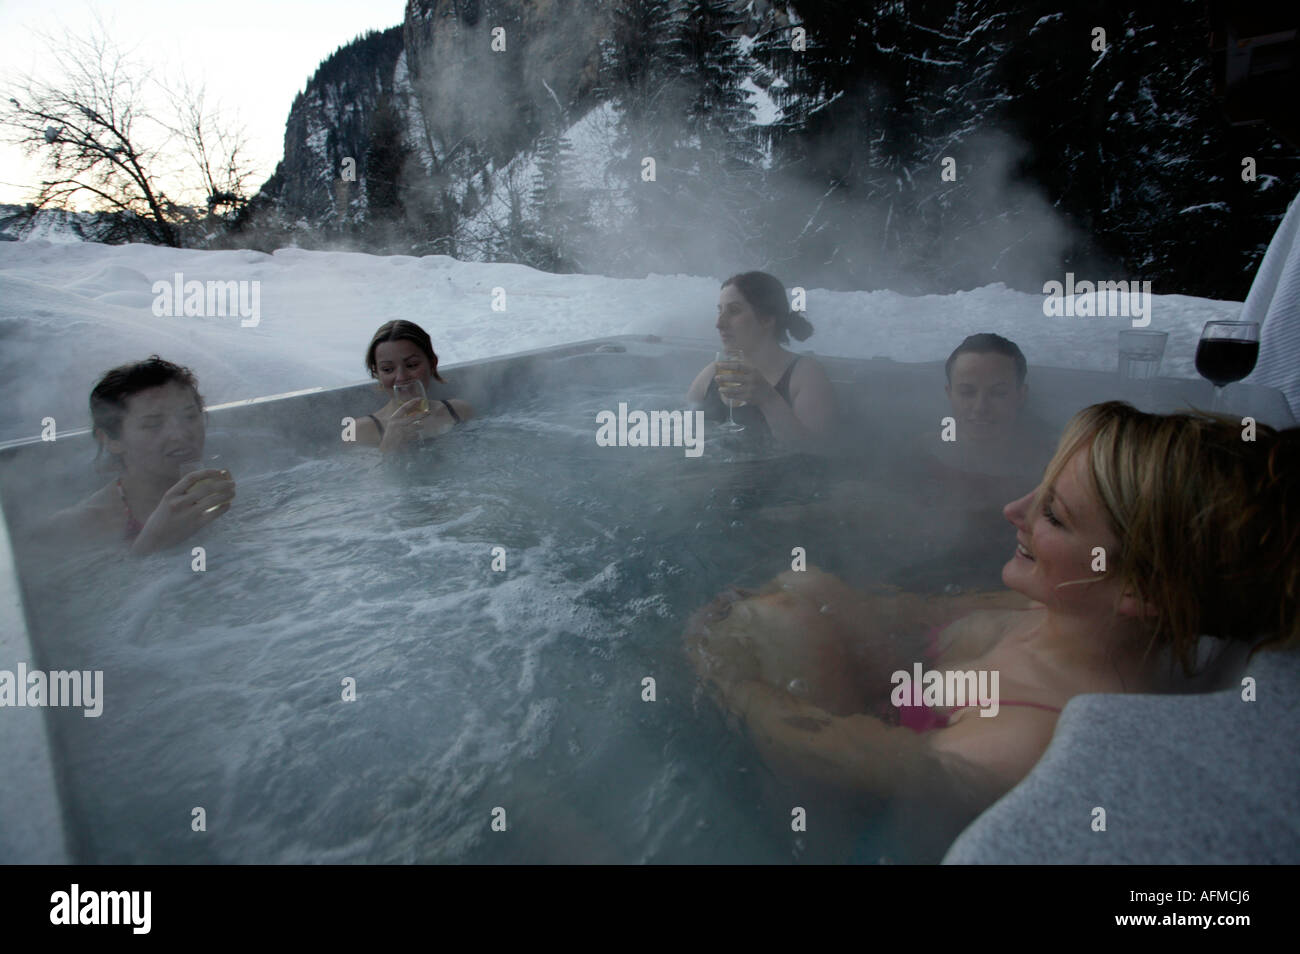 Girl snowboarders in a sauna steam bath after a heavy day on the slopes,  Morzine, Porte de Soleil, Alps, France, Europe Stock Photo - Alamy